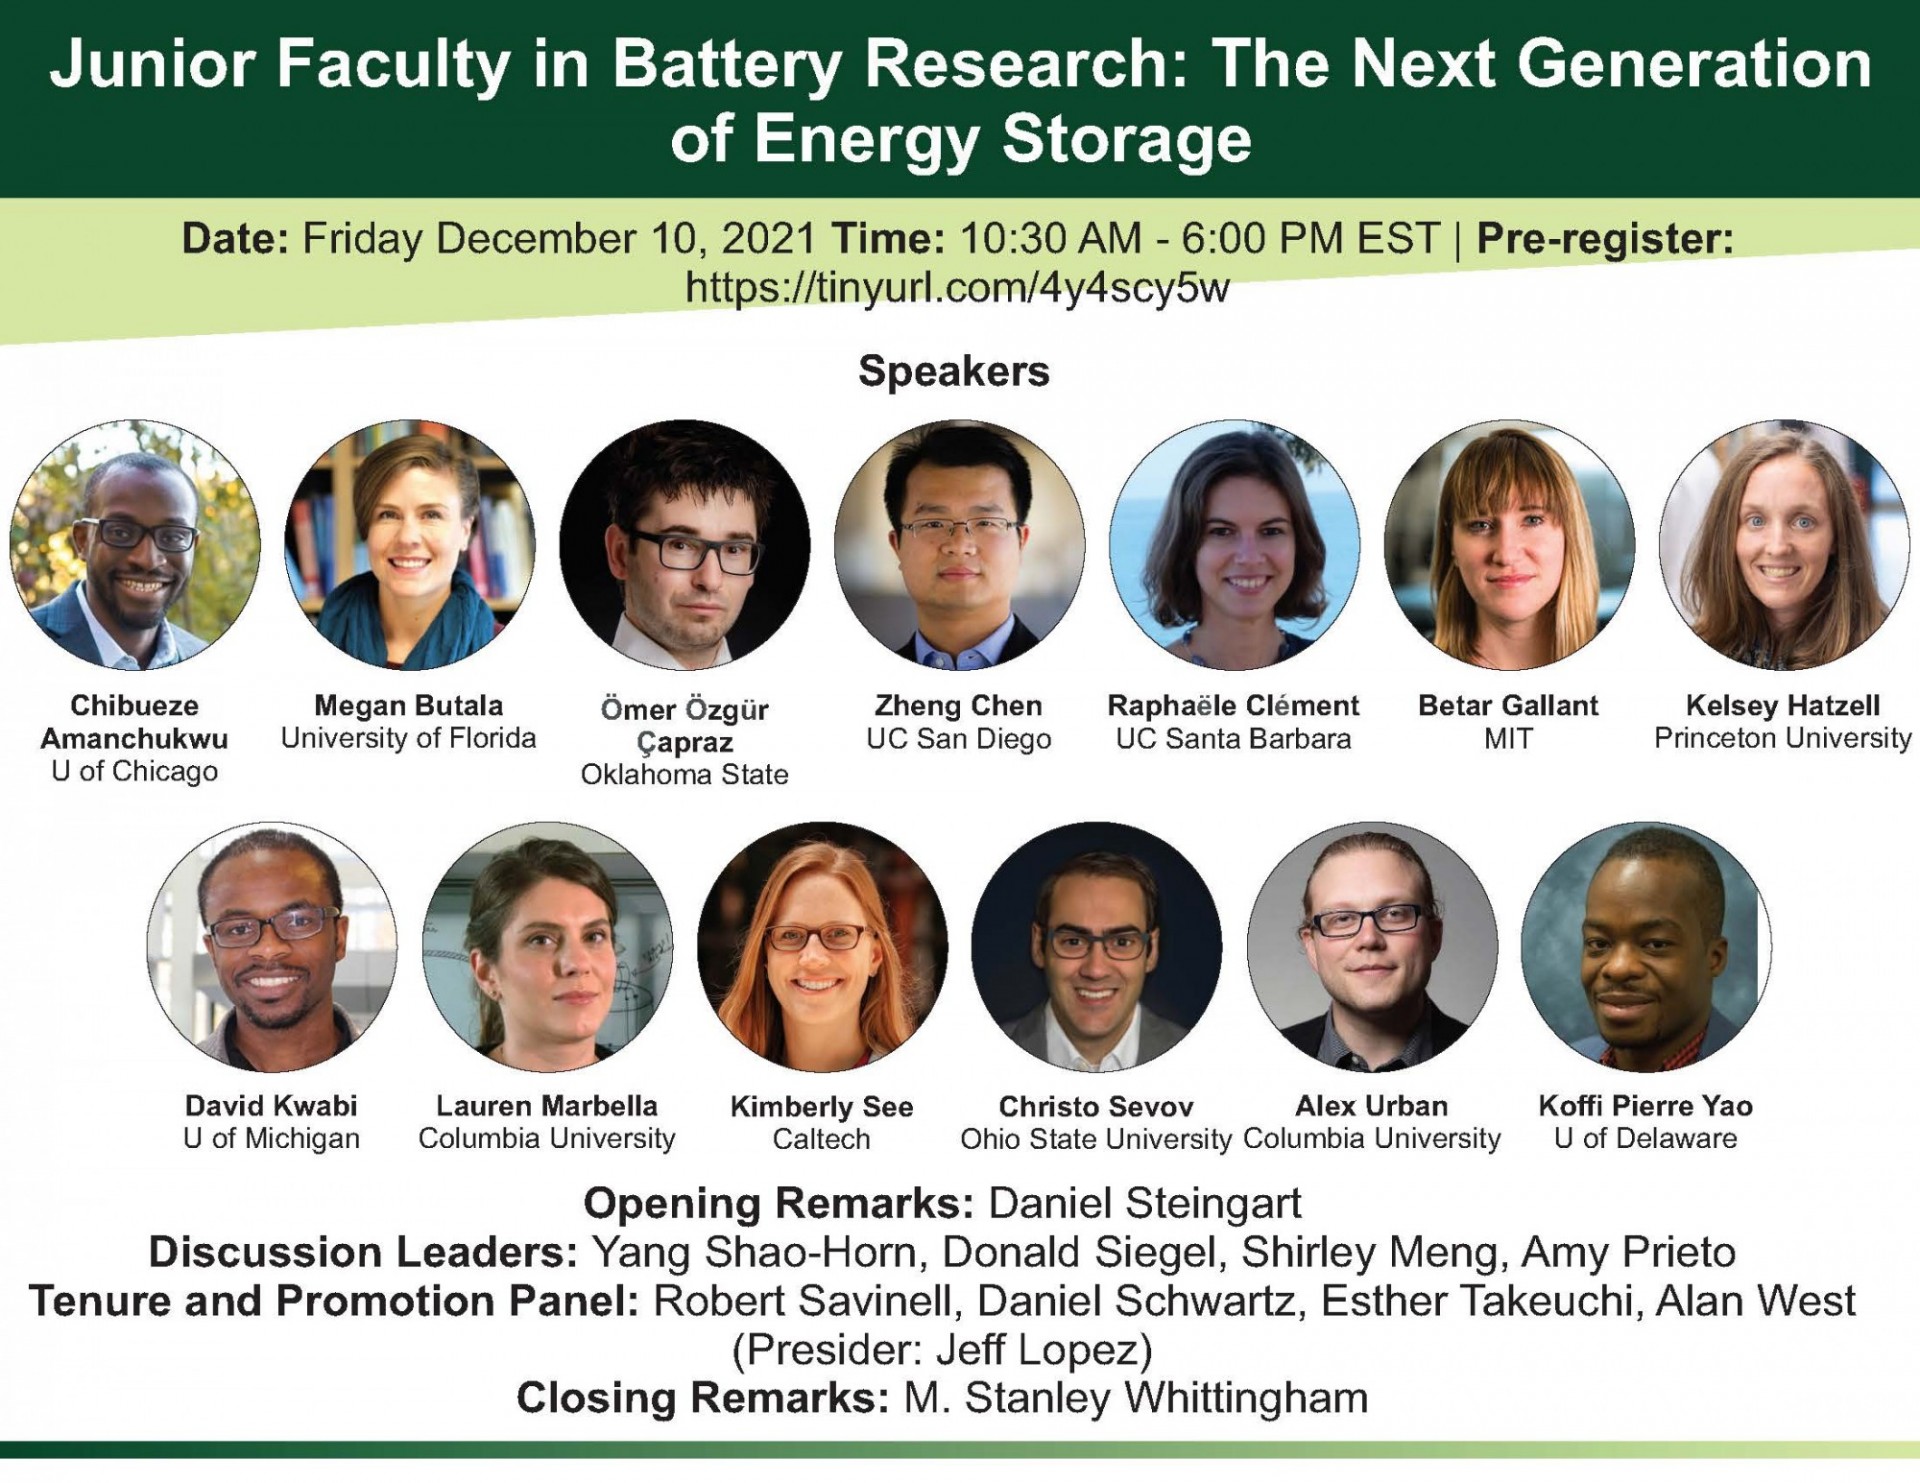 Junior Faculty in Battery Research: The Next Generation of Energy Storage